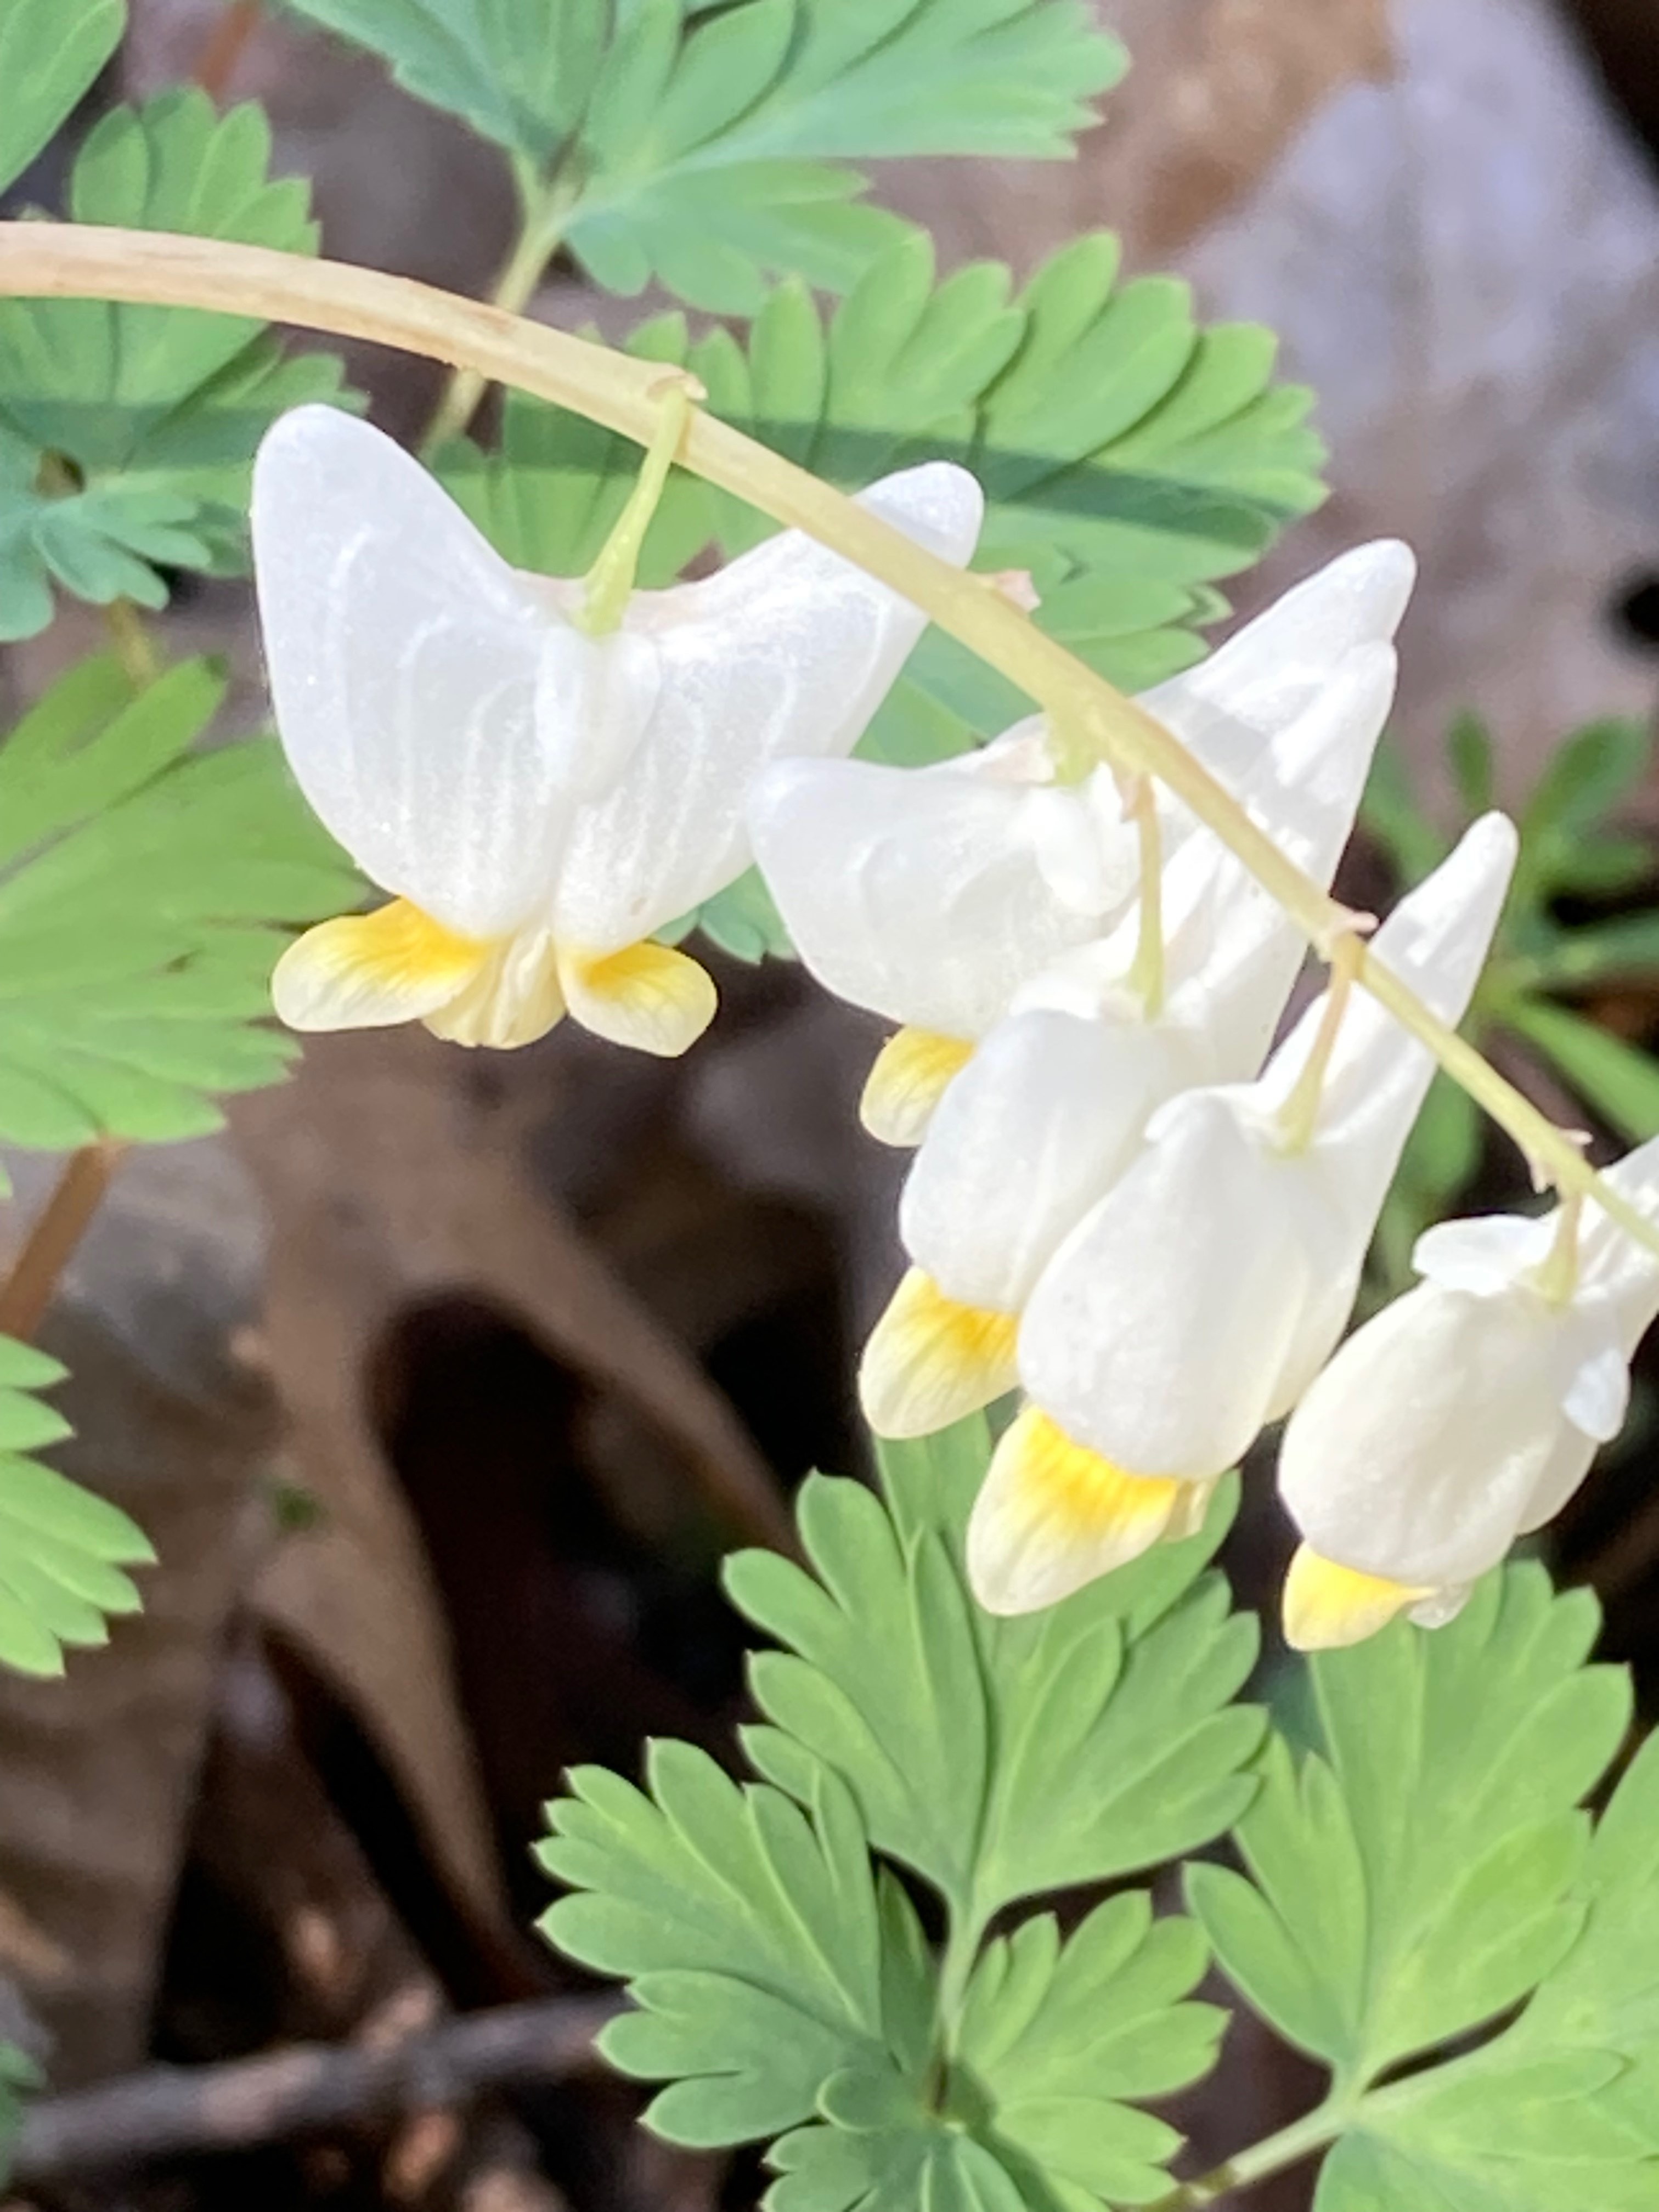 The Scientific Name is Dicentra cucullaria. You will likely hear them called Dutchman's Breeches, Dutchman's Britches. This picture shows the The flowers consists of two white sepals, two white outer spurred petals, and 2 inner petals that are pale yellow with small wings that curl upward. The spurs are joined together at the base.  of Dicentra cucullaria